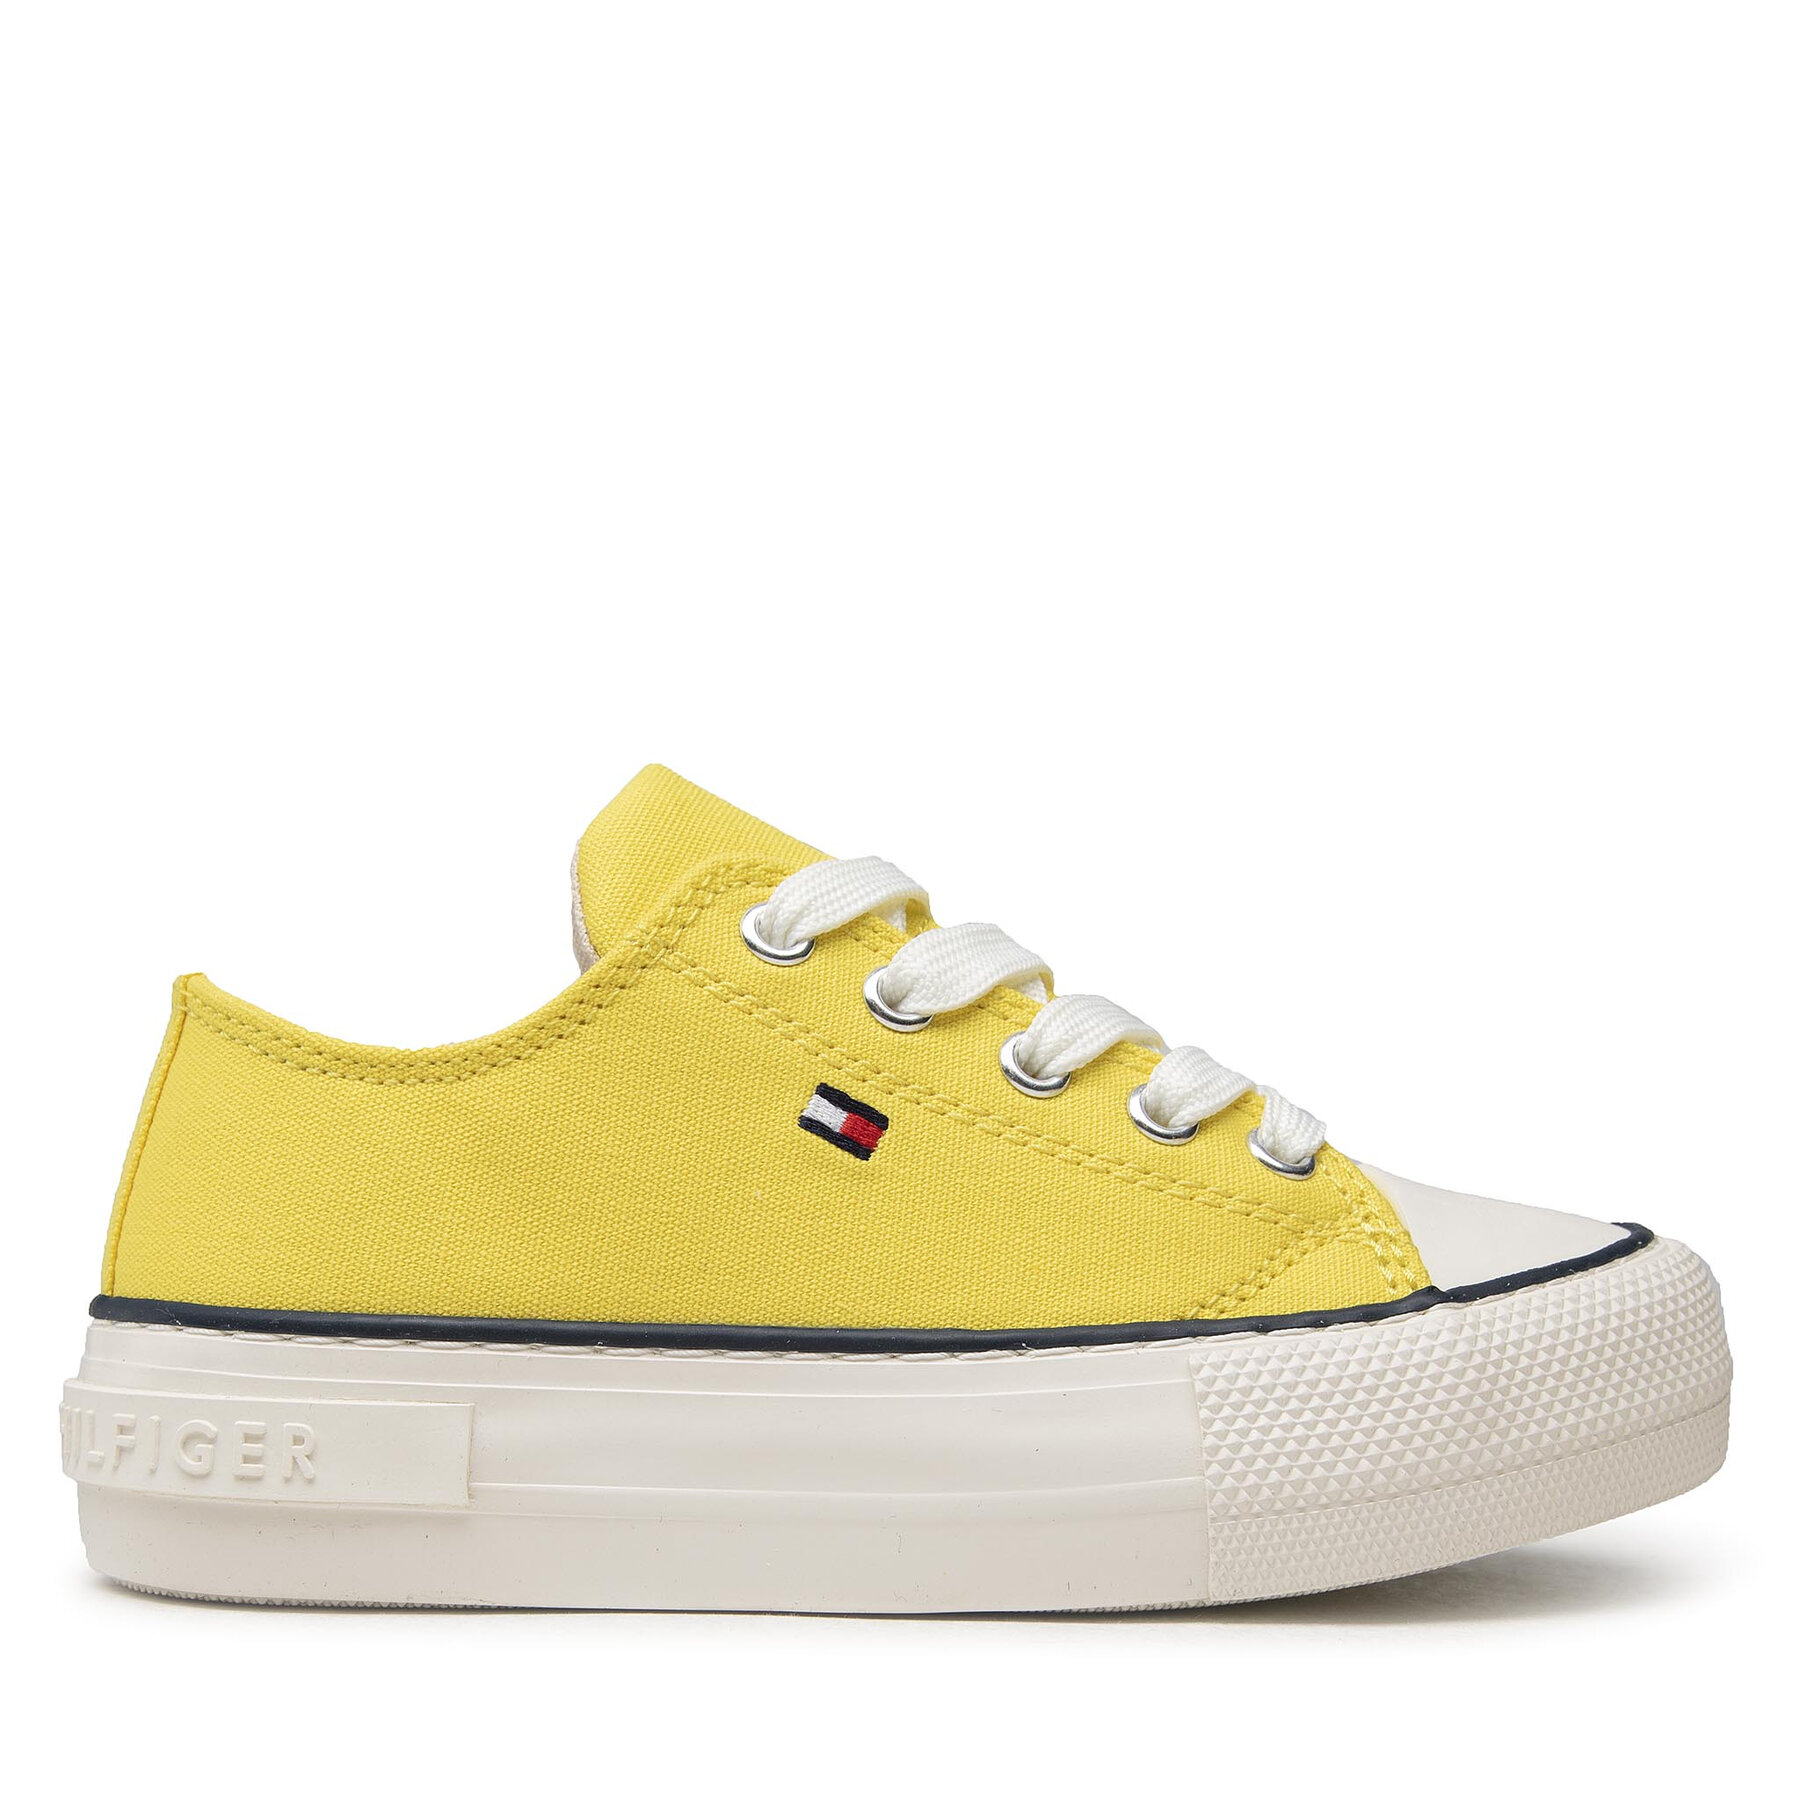 Sportschuhe Tommy Hilfiger Low Cut Lace-Up Sneaker T3A4-32118-0890 M Yellow 200 von Tommy Hilfiger